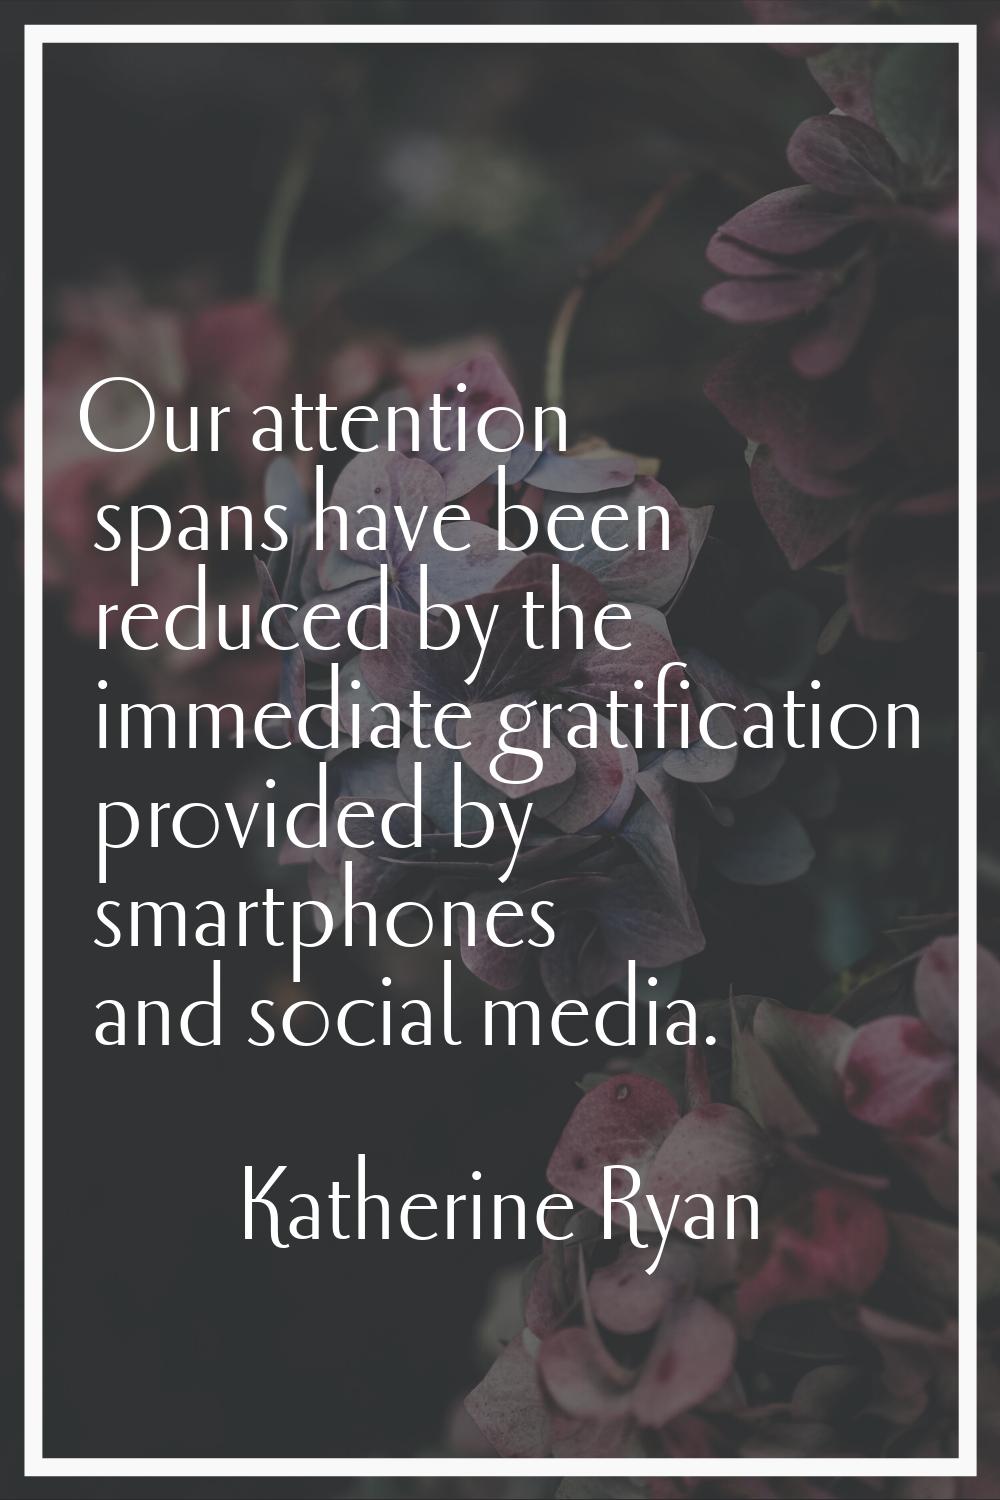 Our attention spans have been reduced by the immediate gratification provided by smartphones and so